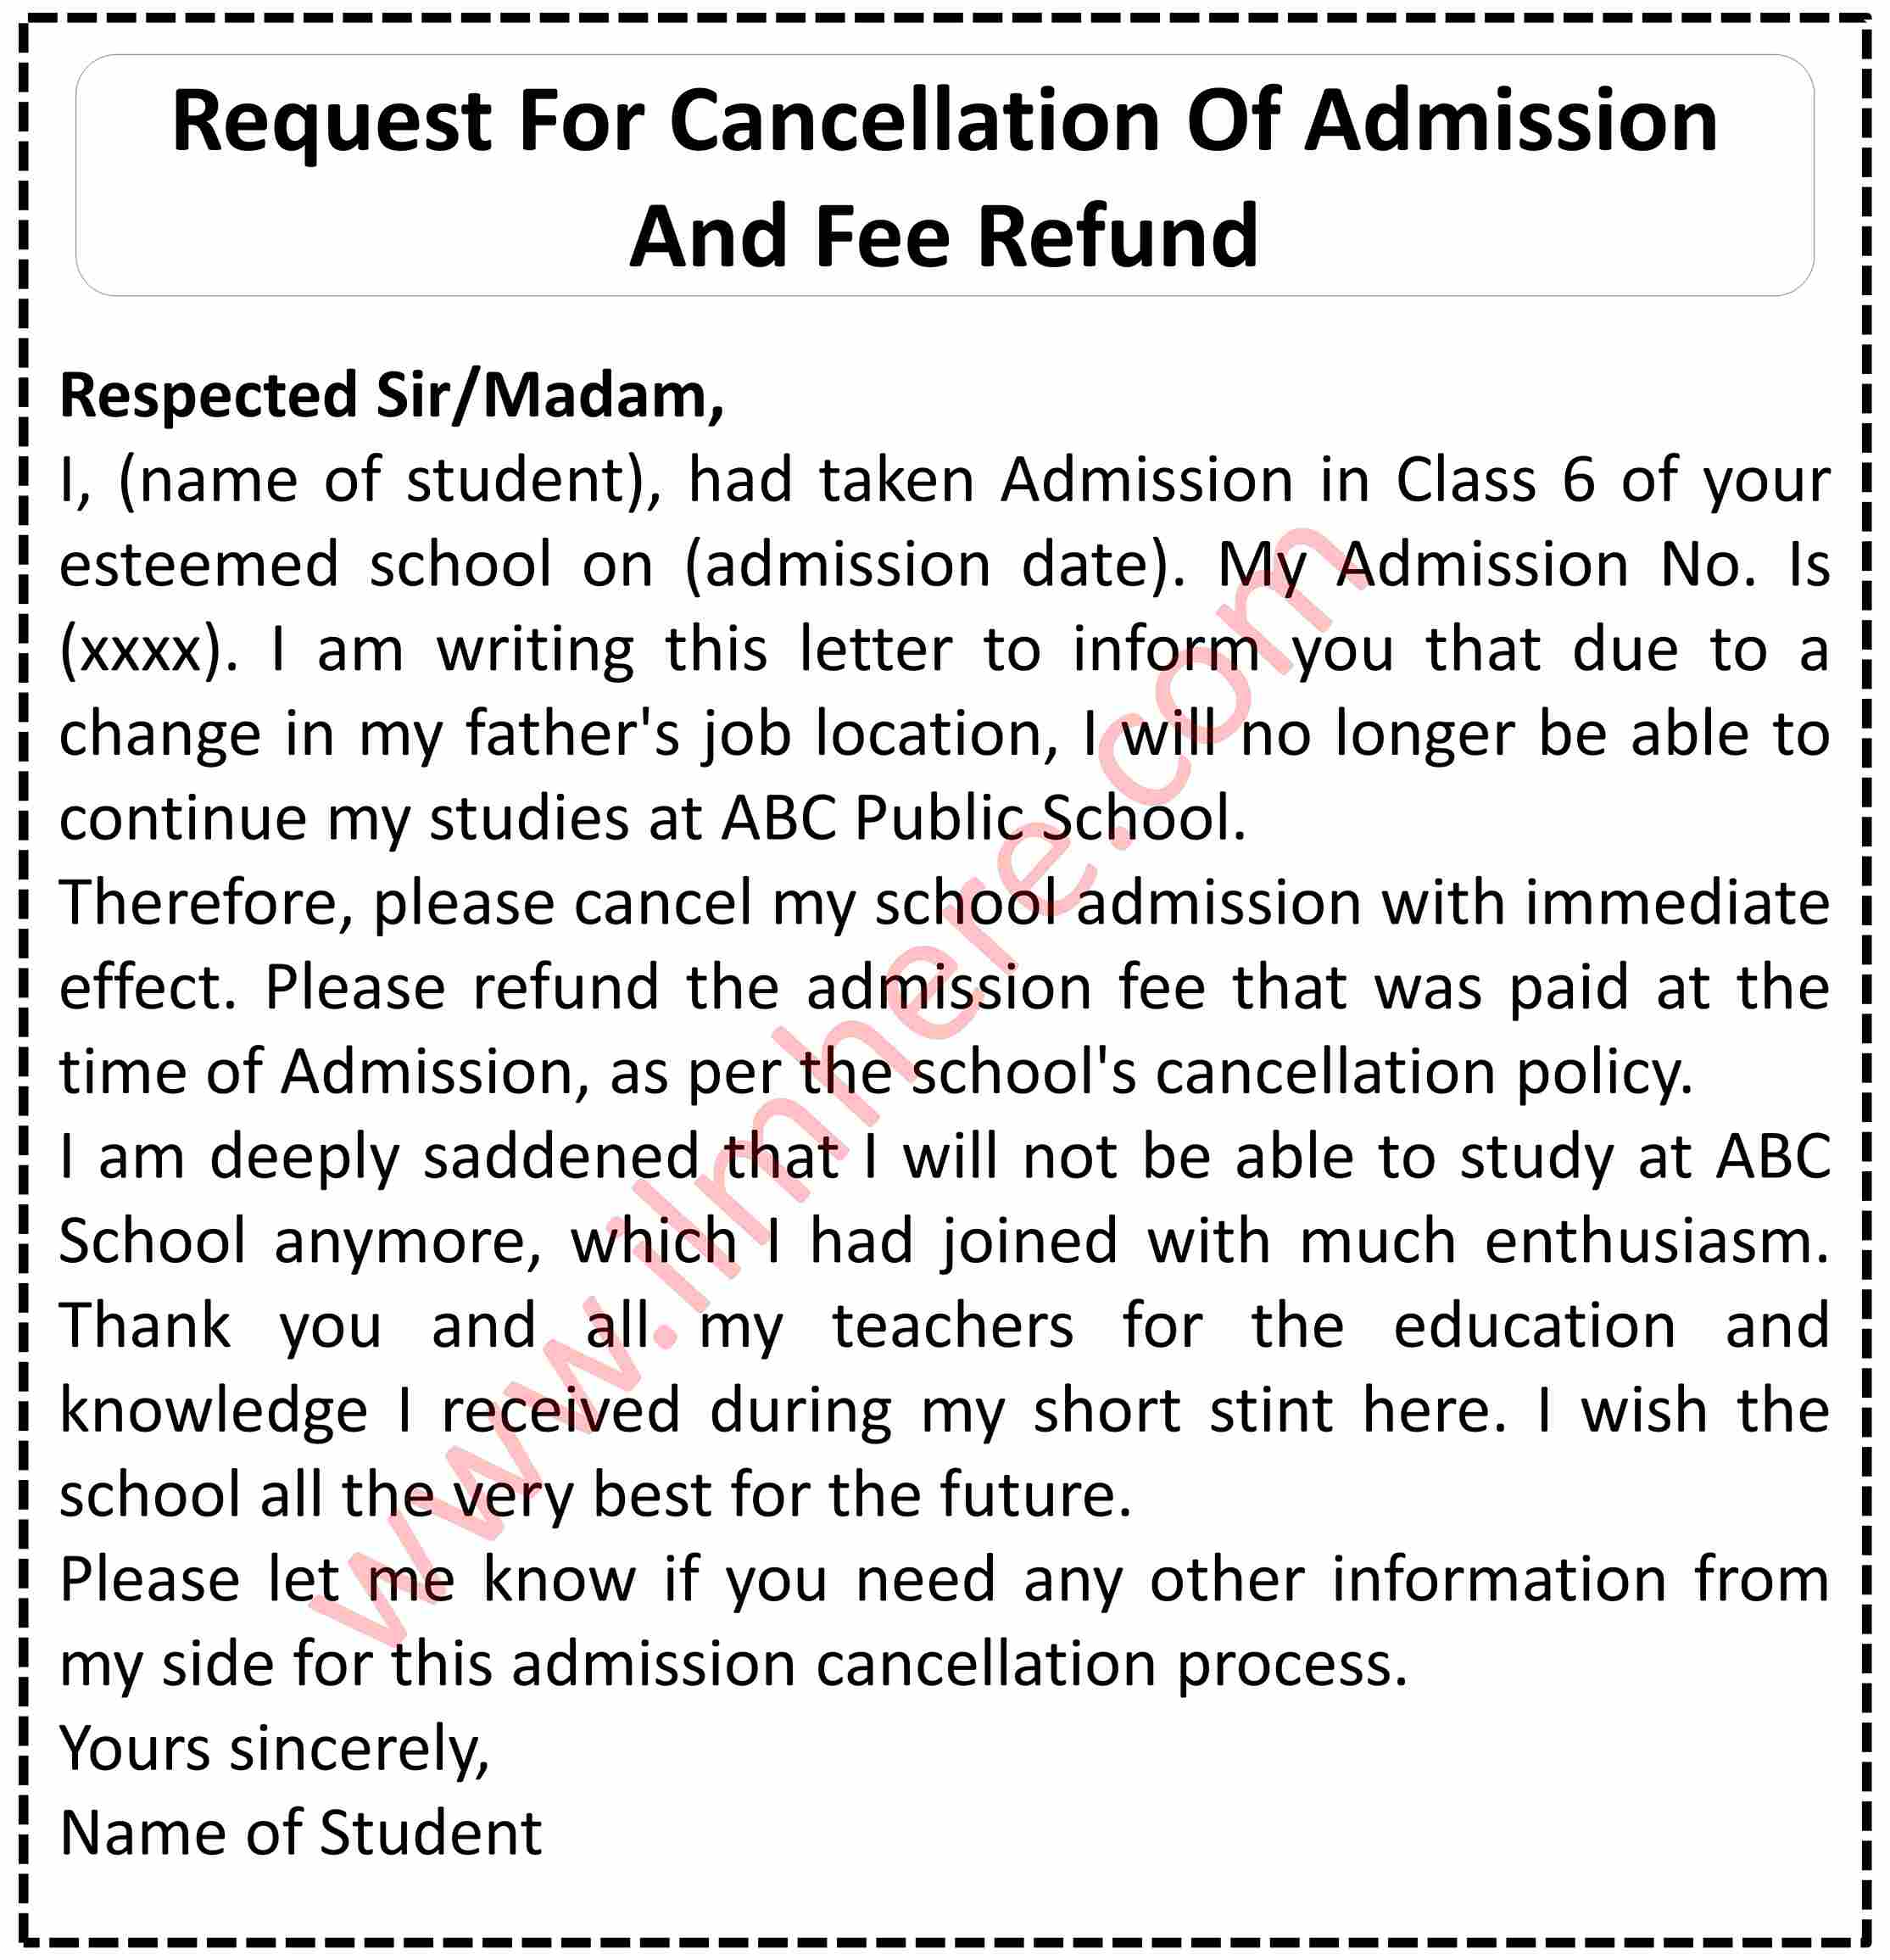 Request-For-Cancellation-Of-Admission